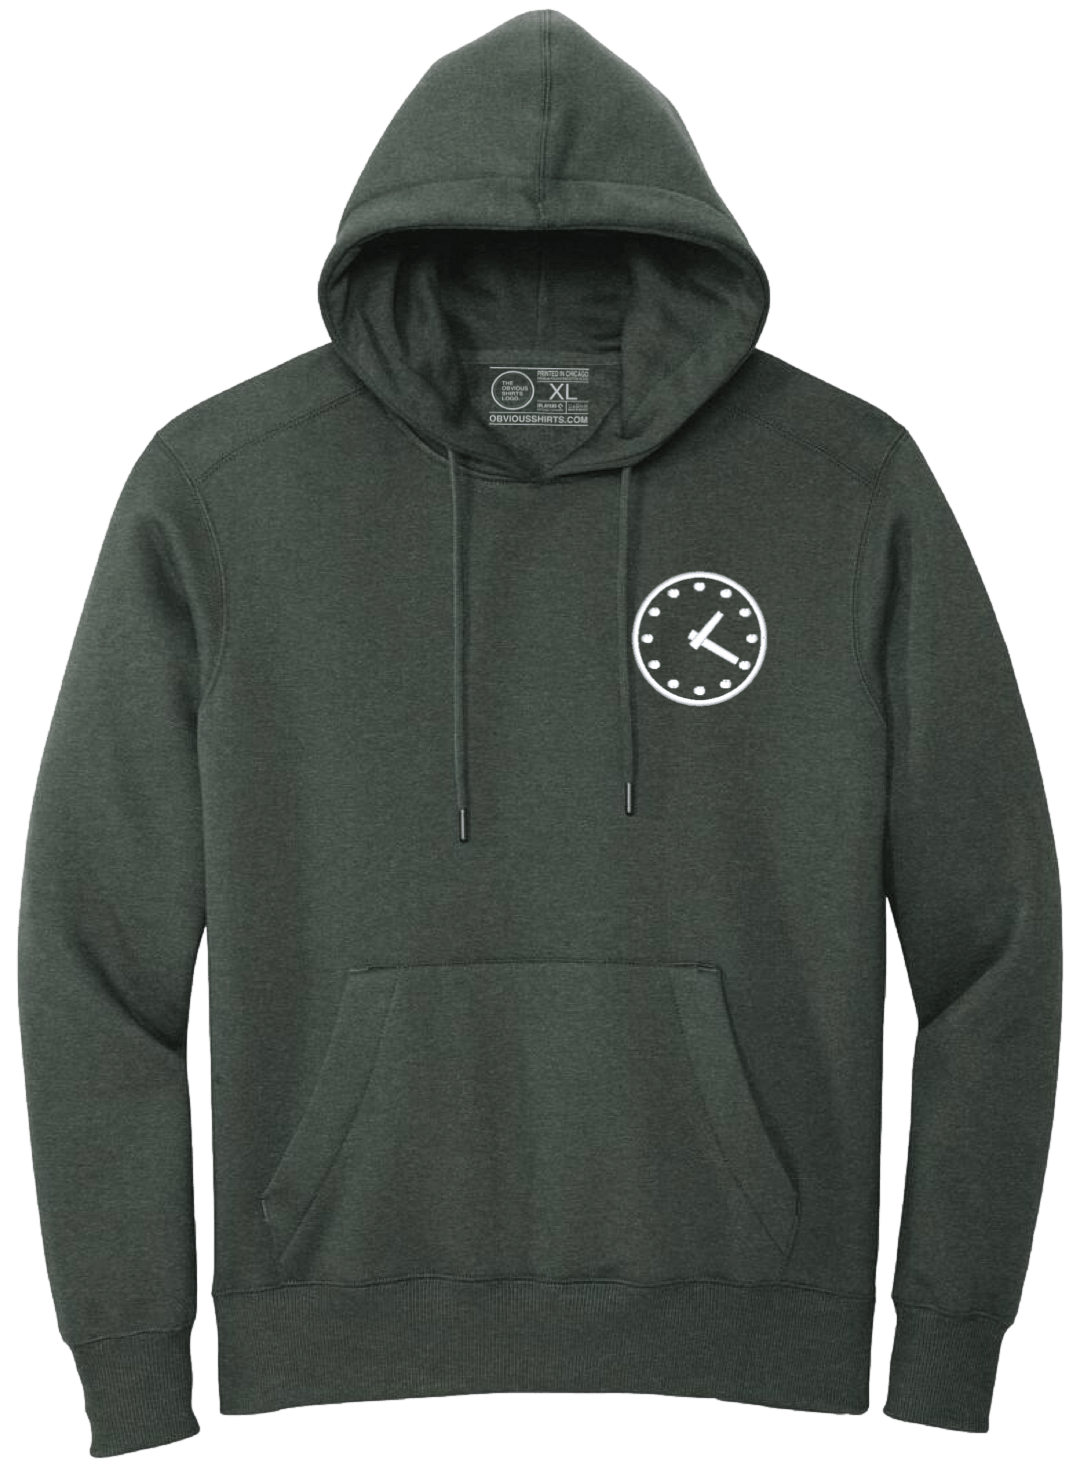 WRIGLEY CLOCK EMBROIDERED (HOODED SWEATSHIRT) - OBVIOUS SHIRTS